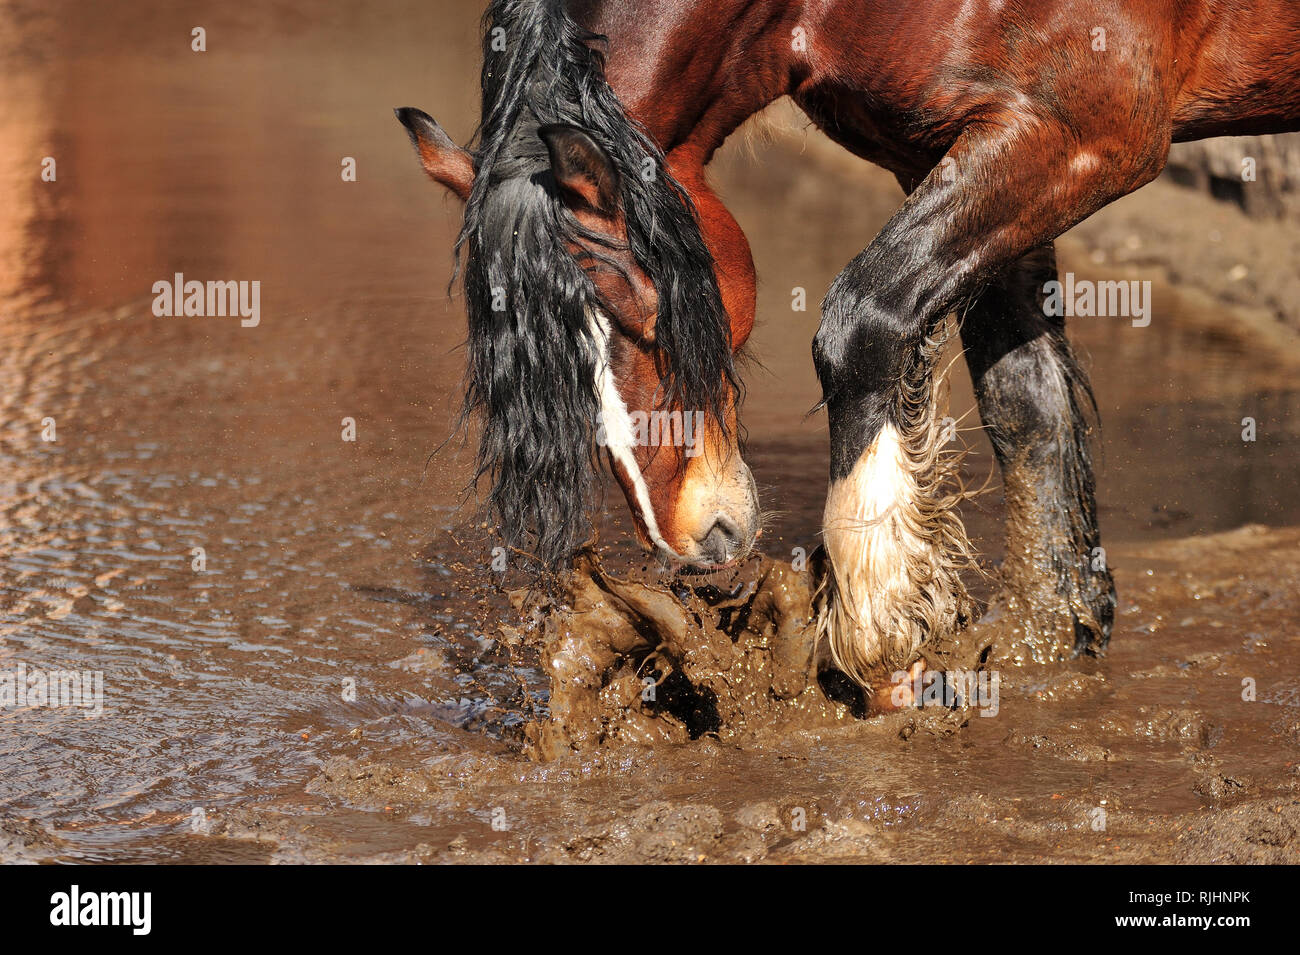 Bay draft horse with black mane splashes muddy water standing in a puddle. Horizontal, sideview, portrait. Stock Photo